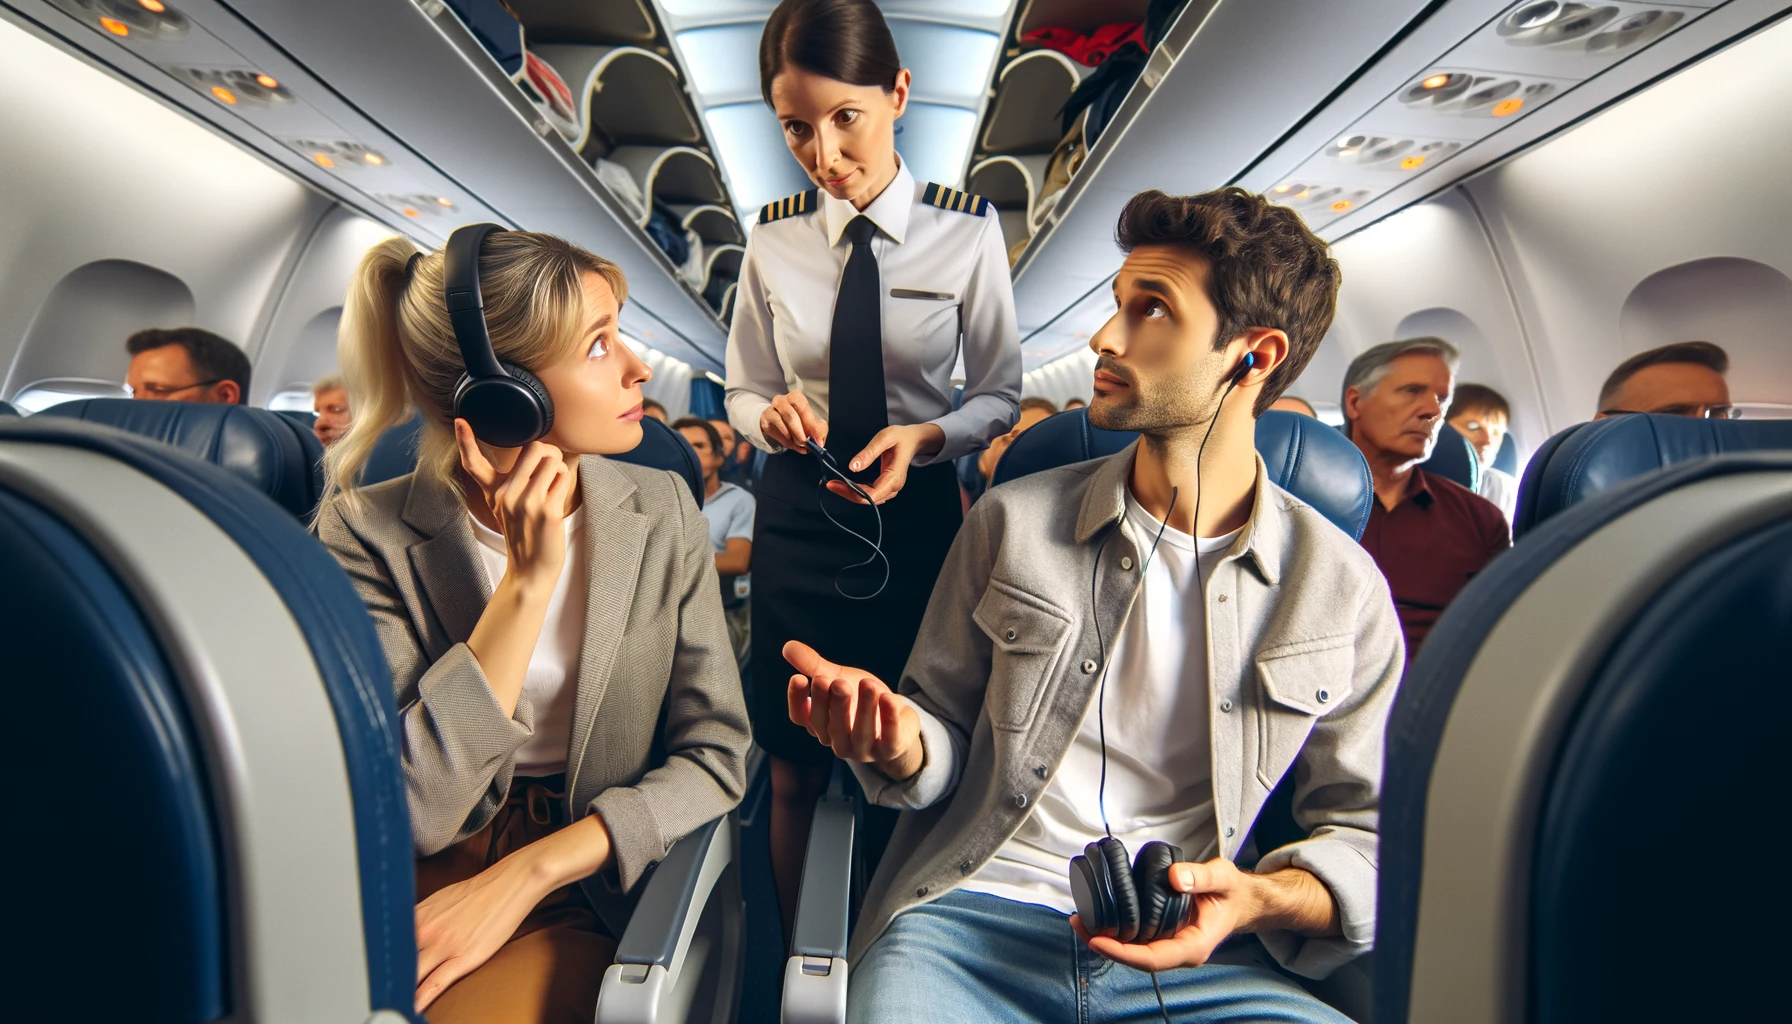 Can I Use Bluetooth Headphones on a Plane? Air Travel Tips!